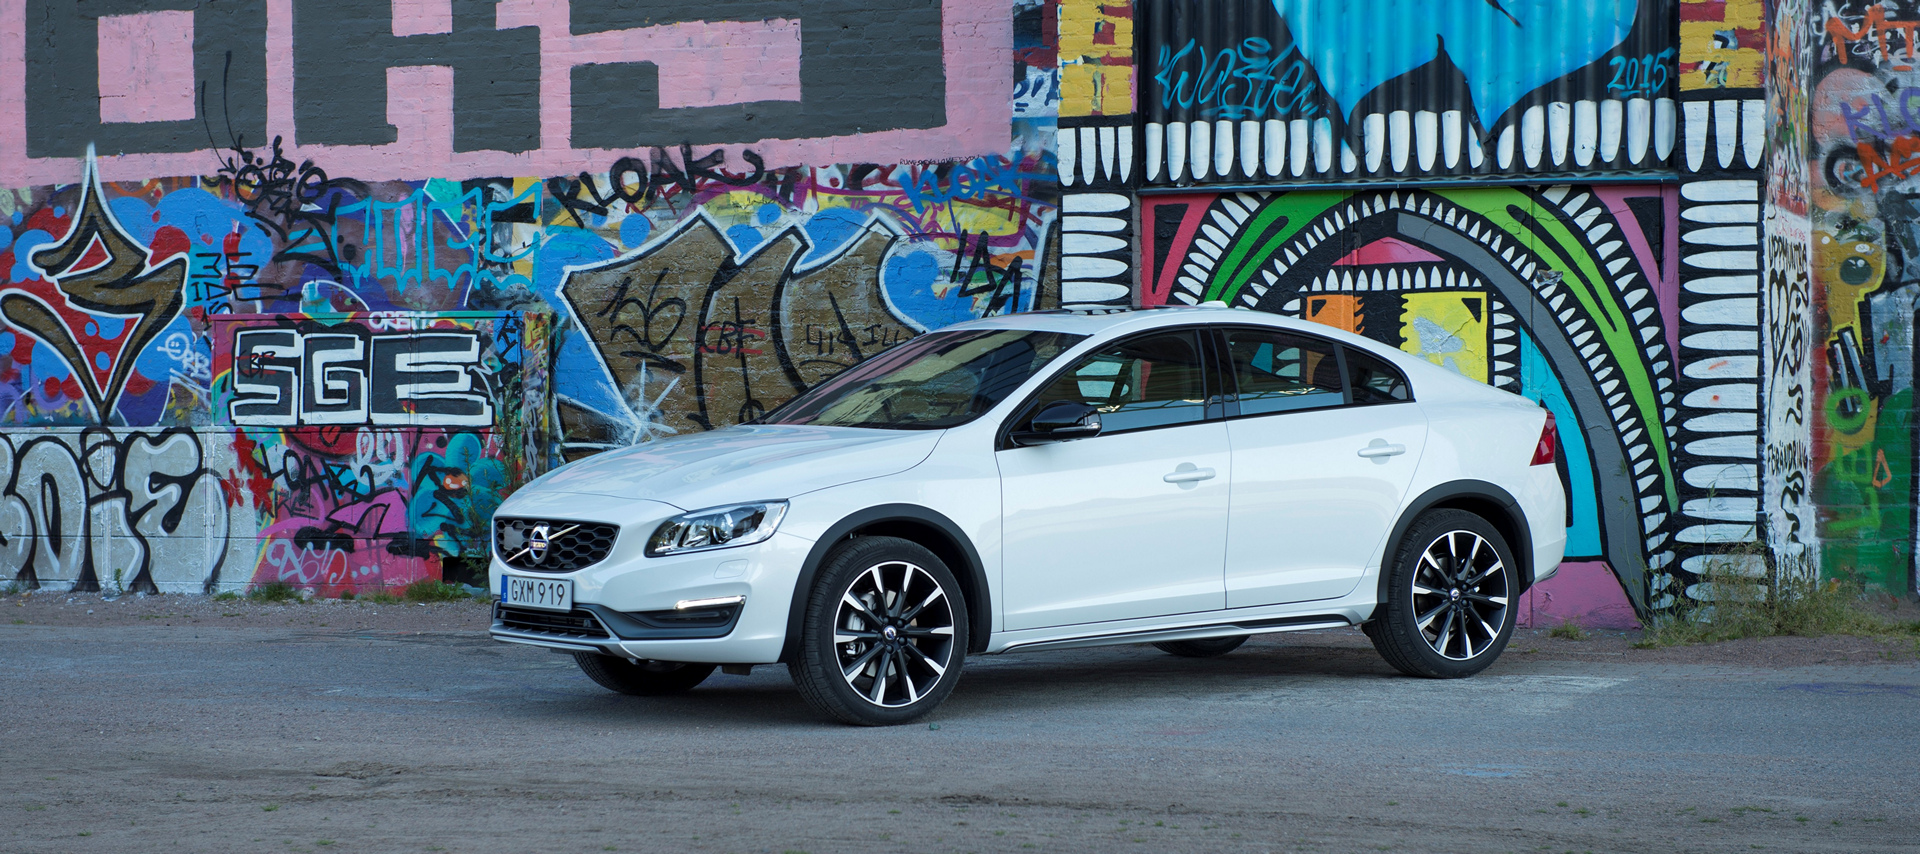 2016 Volvo S60 Cross Country © Zhejiang Geely Holding Group Co., Ltd